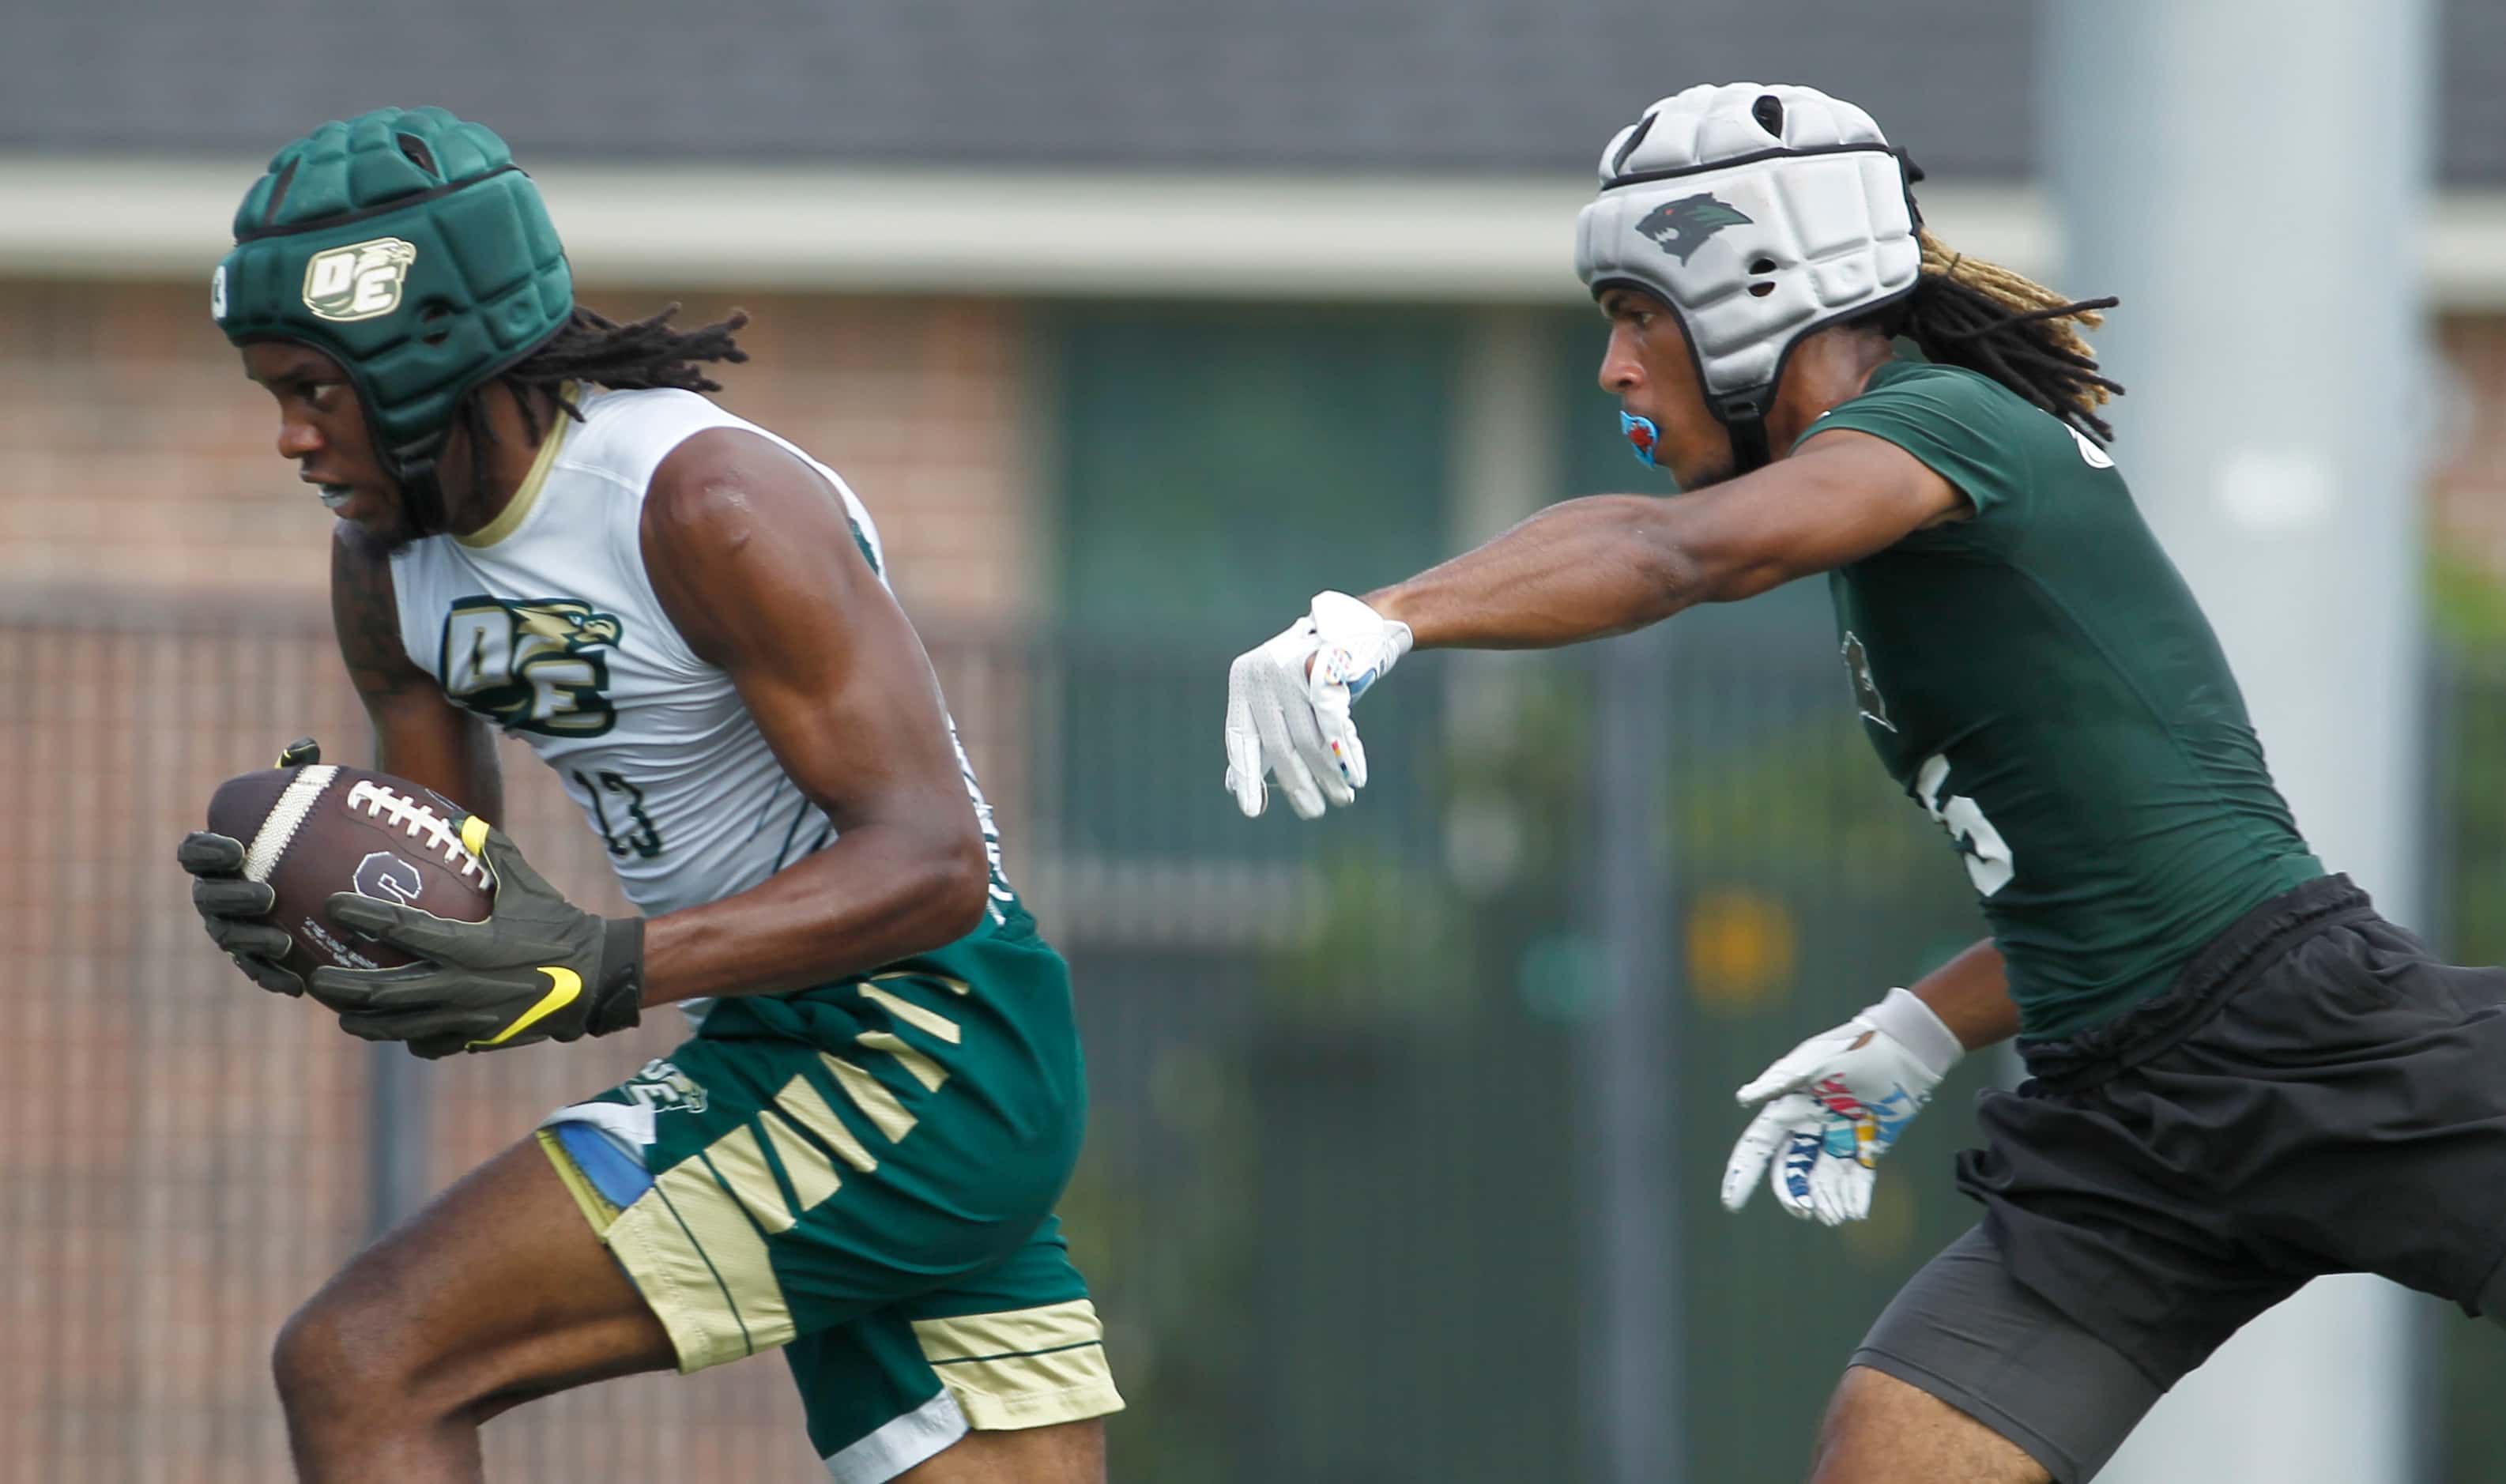 DeSoto receiver Daylon Singleton (13) secures the long pass and scores ahead of the pursuit...